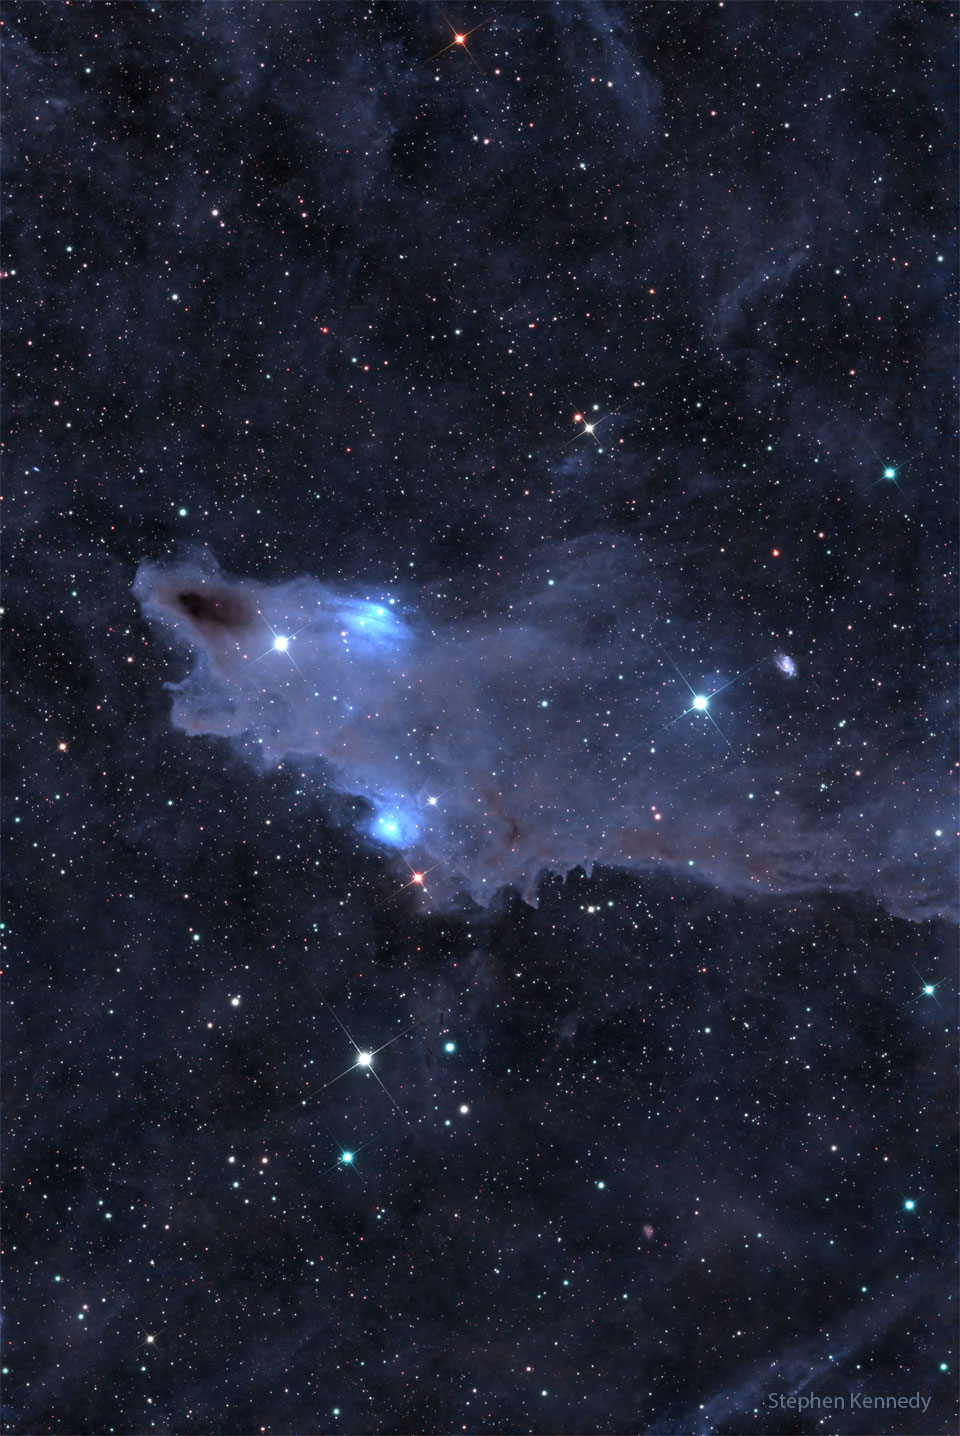 A dark brown cloud that appears similar to a shark is seen
against a background filled with stars and less prominent 
blue-shaded nebulae.
Please see the explanation for more detailed information.